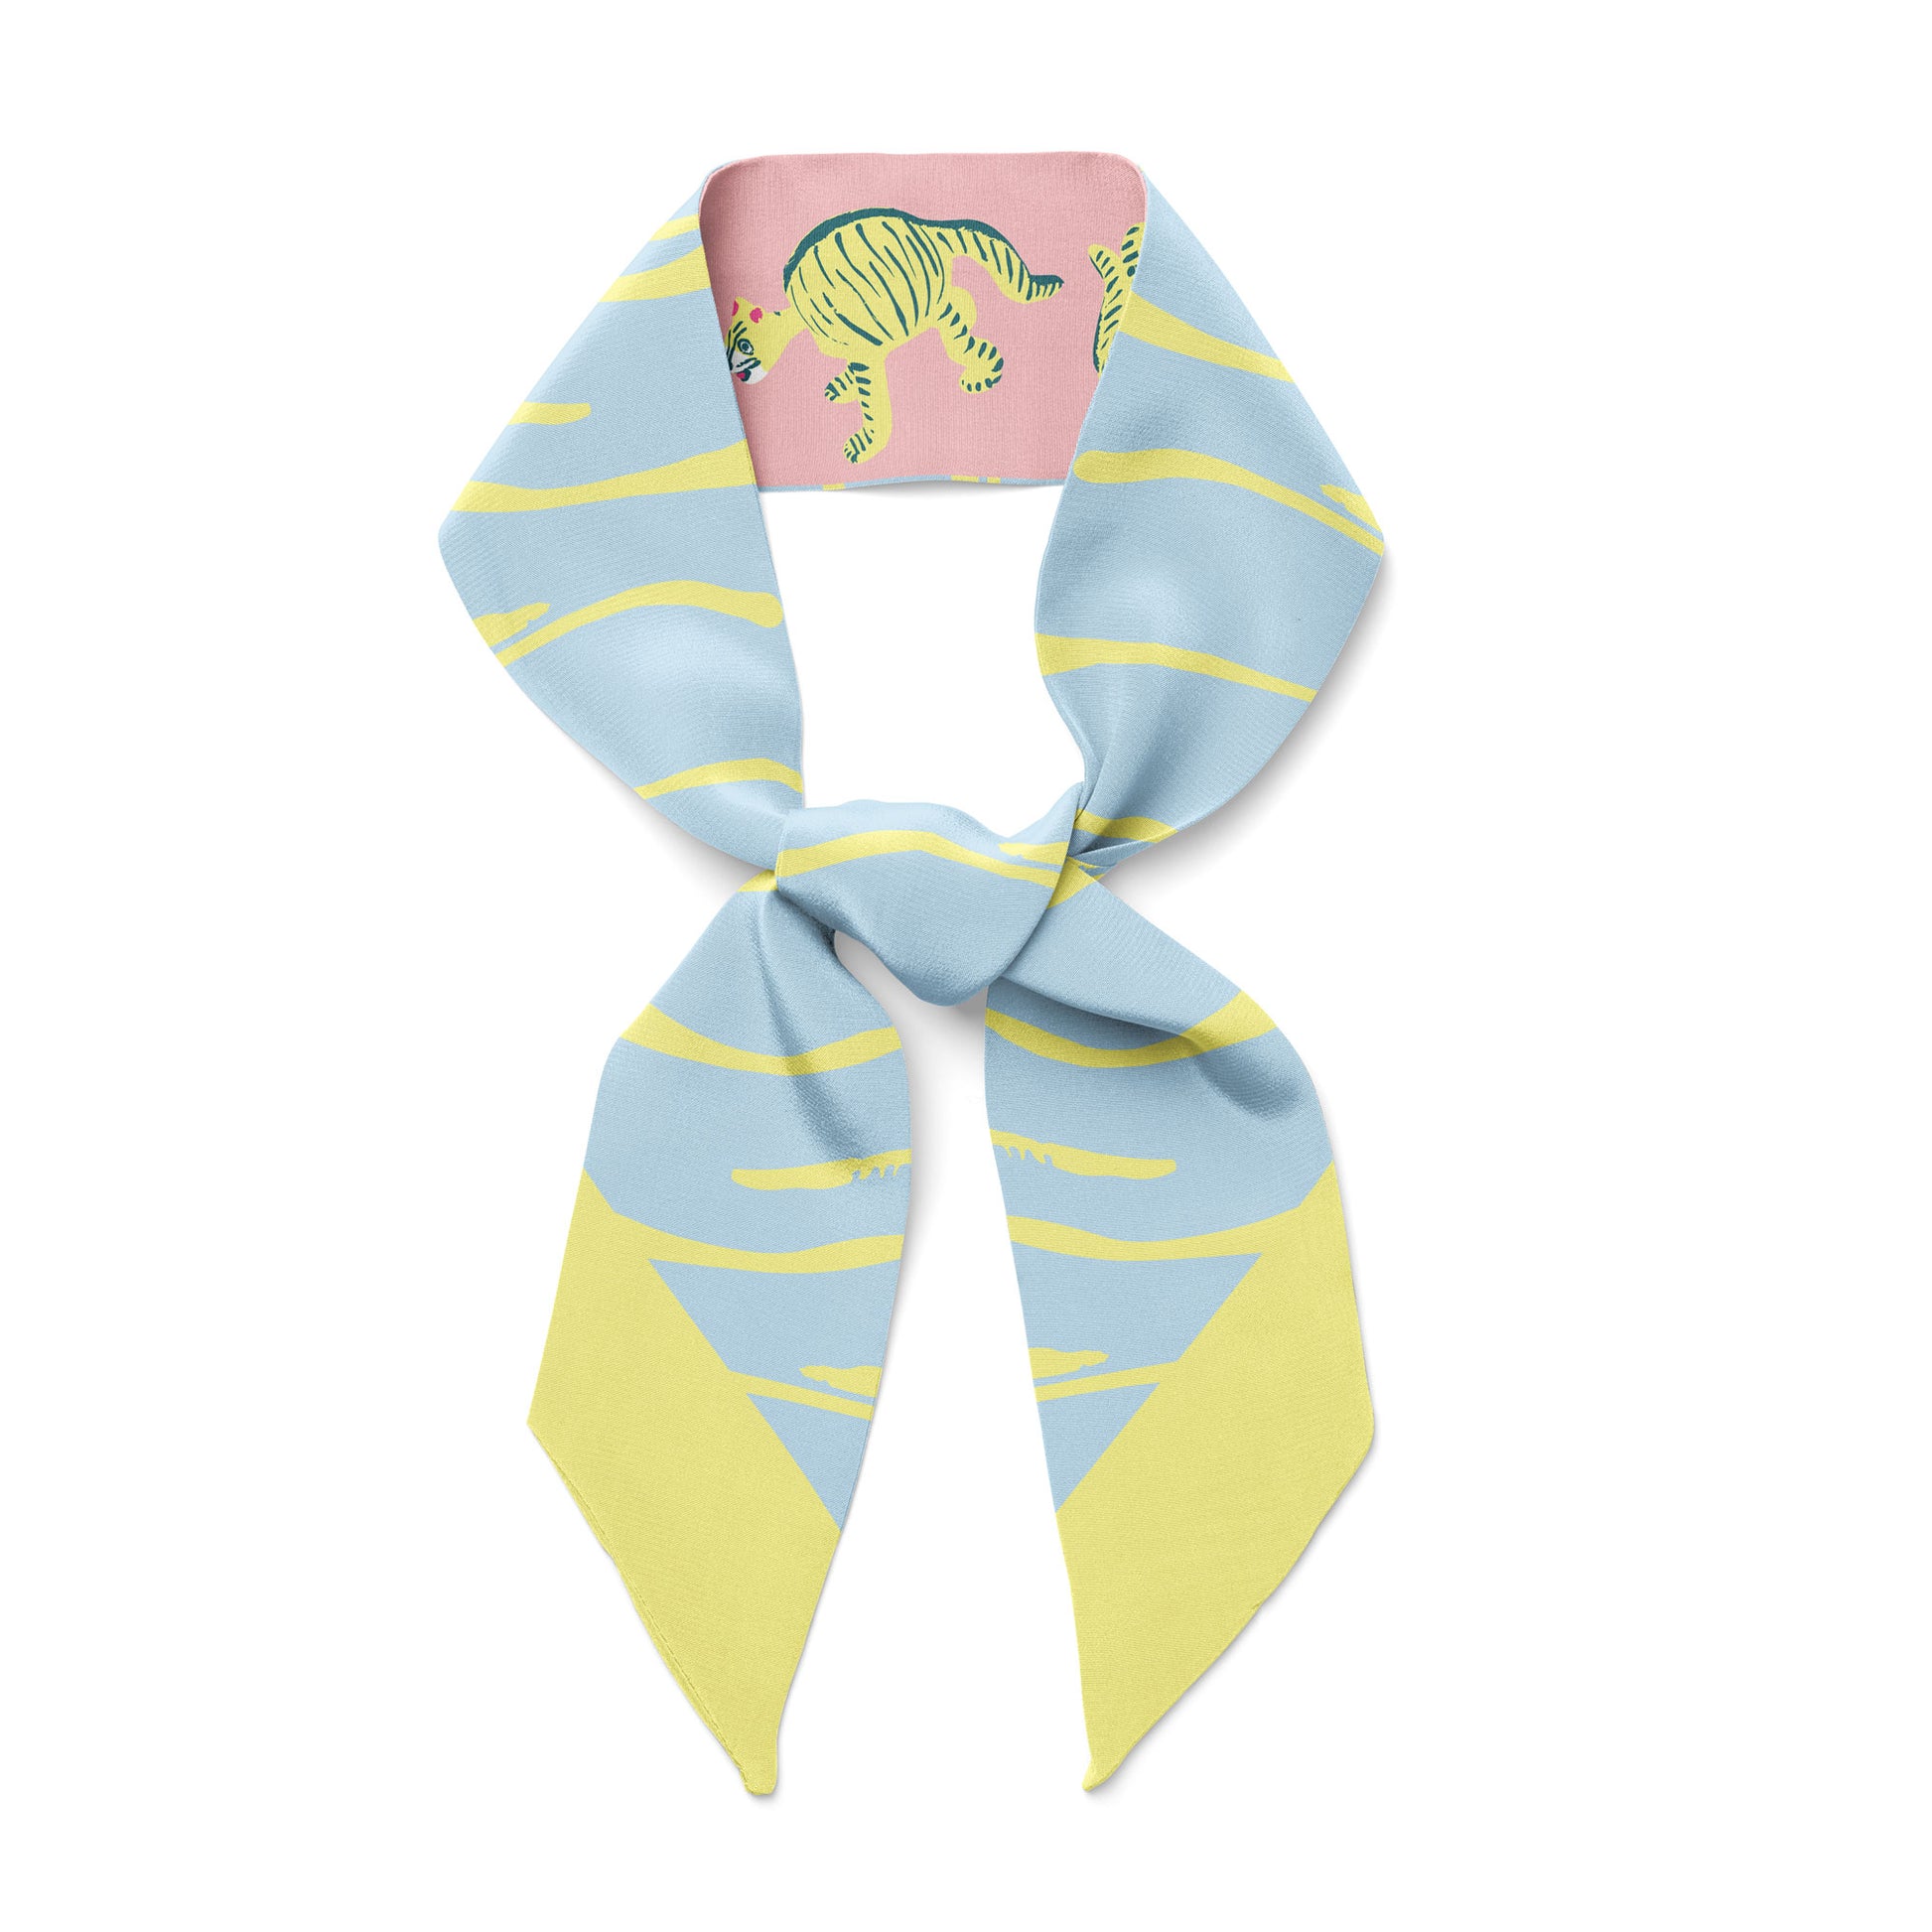 Tied twilly bow ribbon silk scarf pink and blue with yellow tigers and tiger stripes